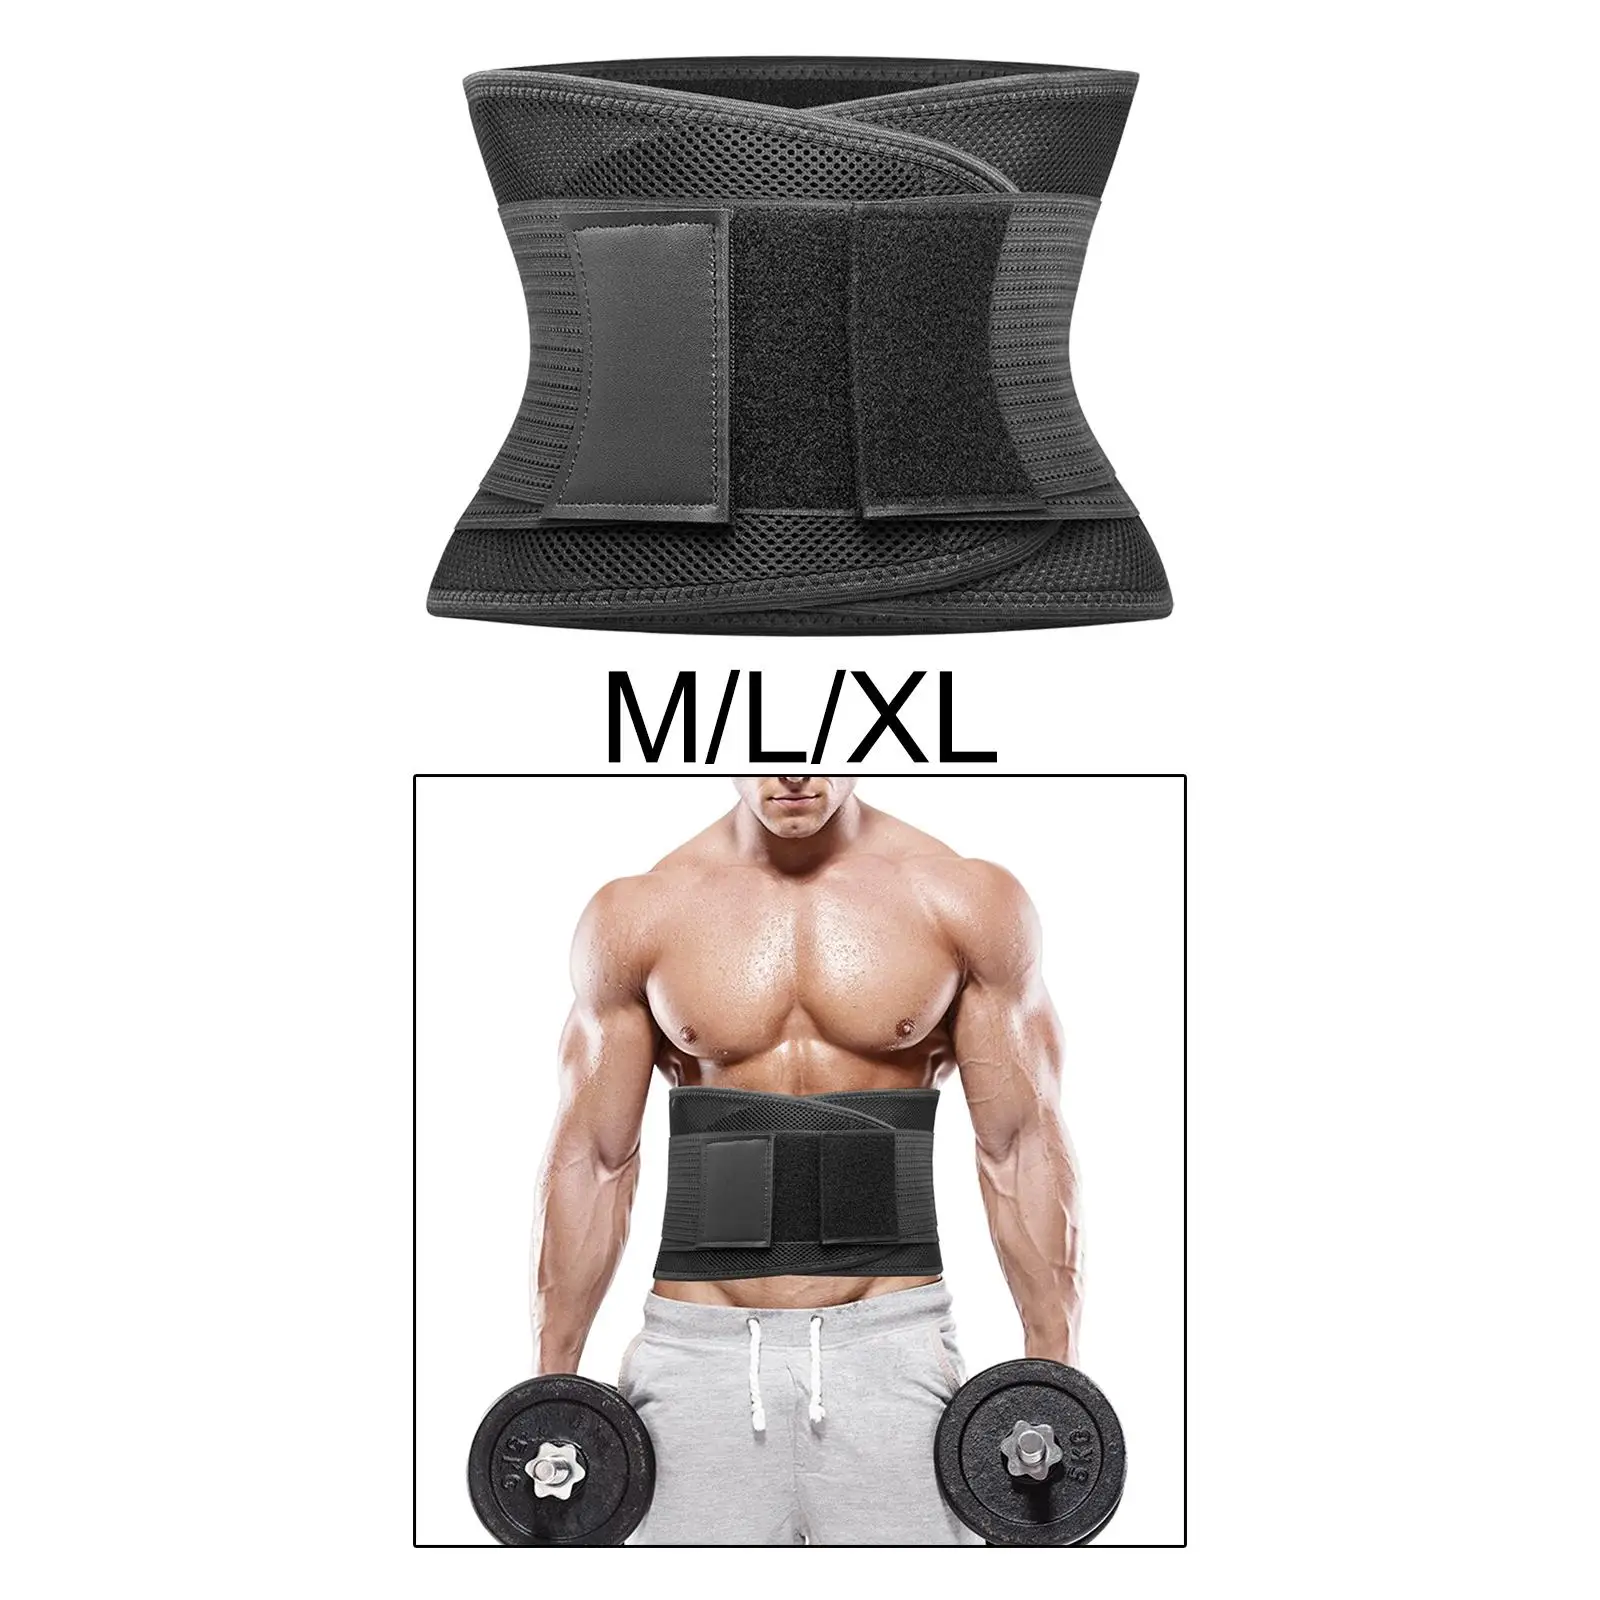 Waist Support Belt Gym Training Weight Lifting Abdominal with 4 Stays Powerlifting Lower for Men Women